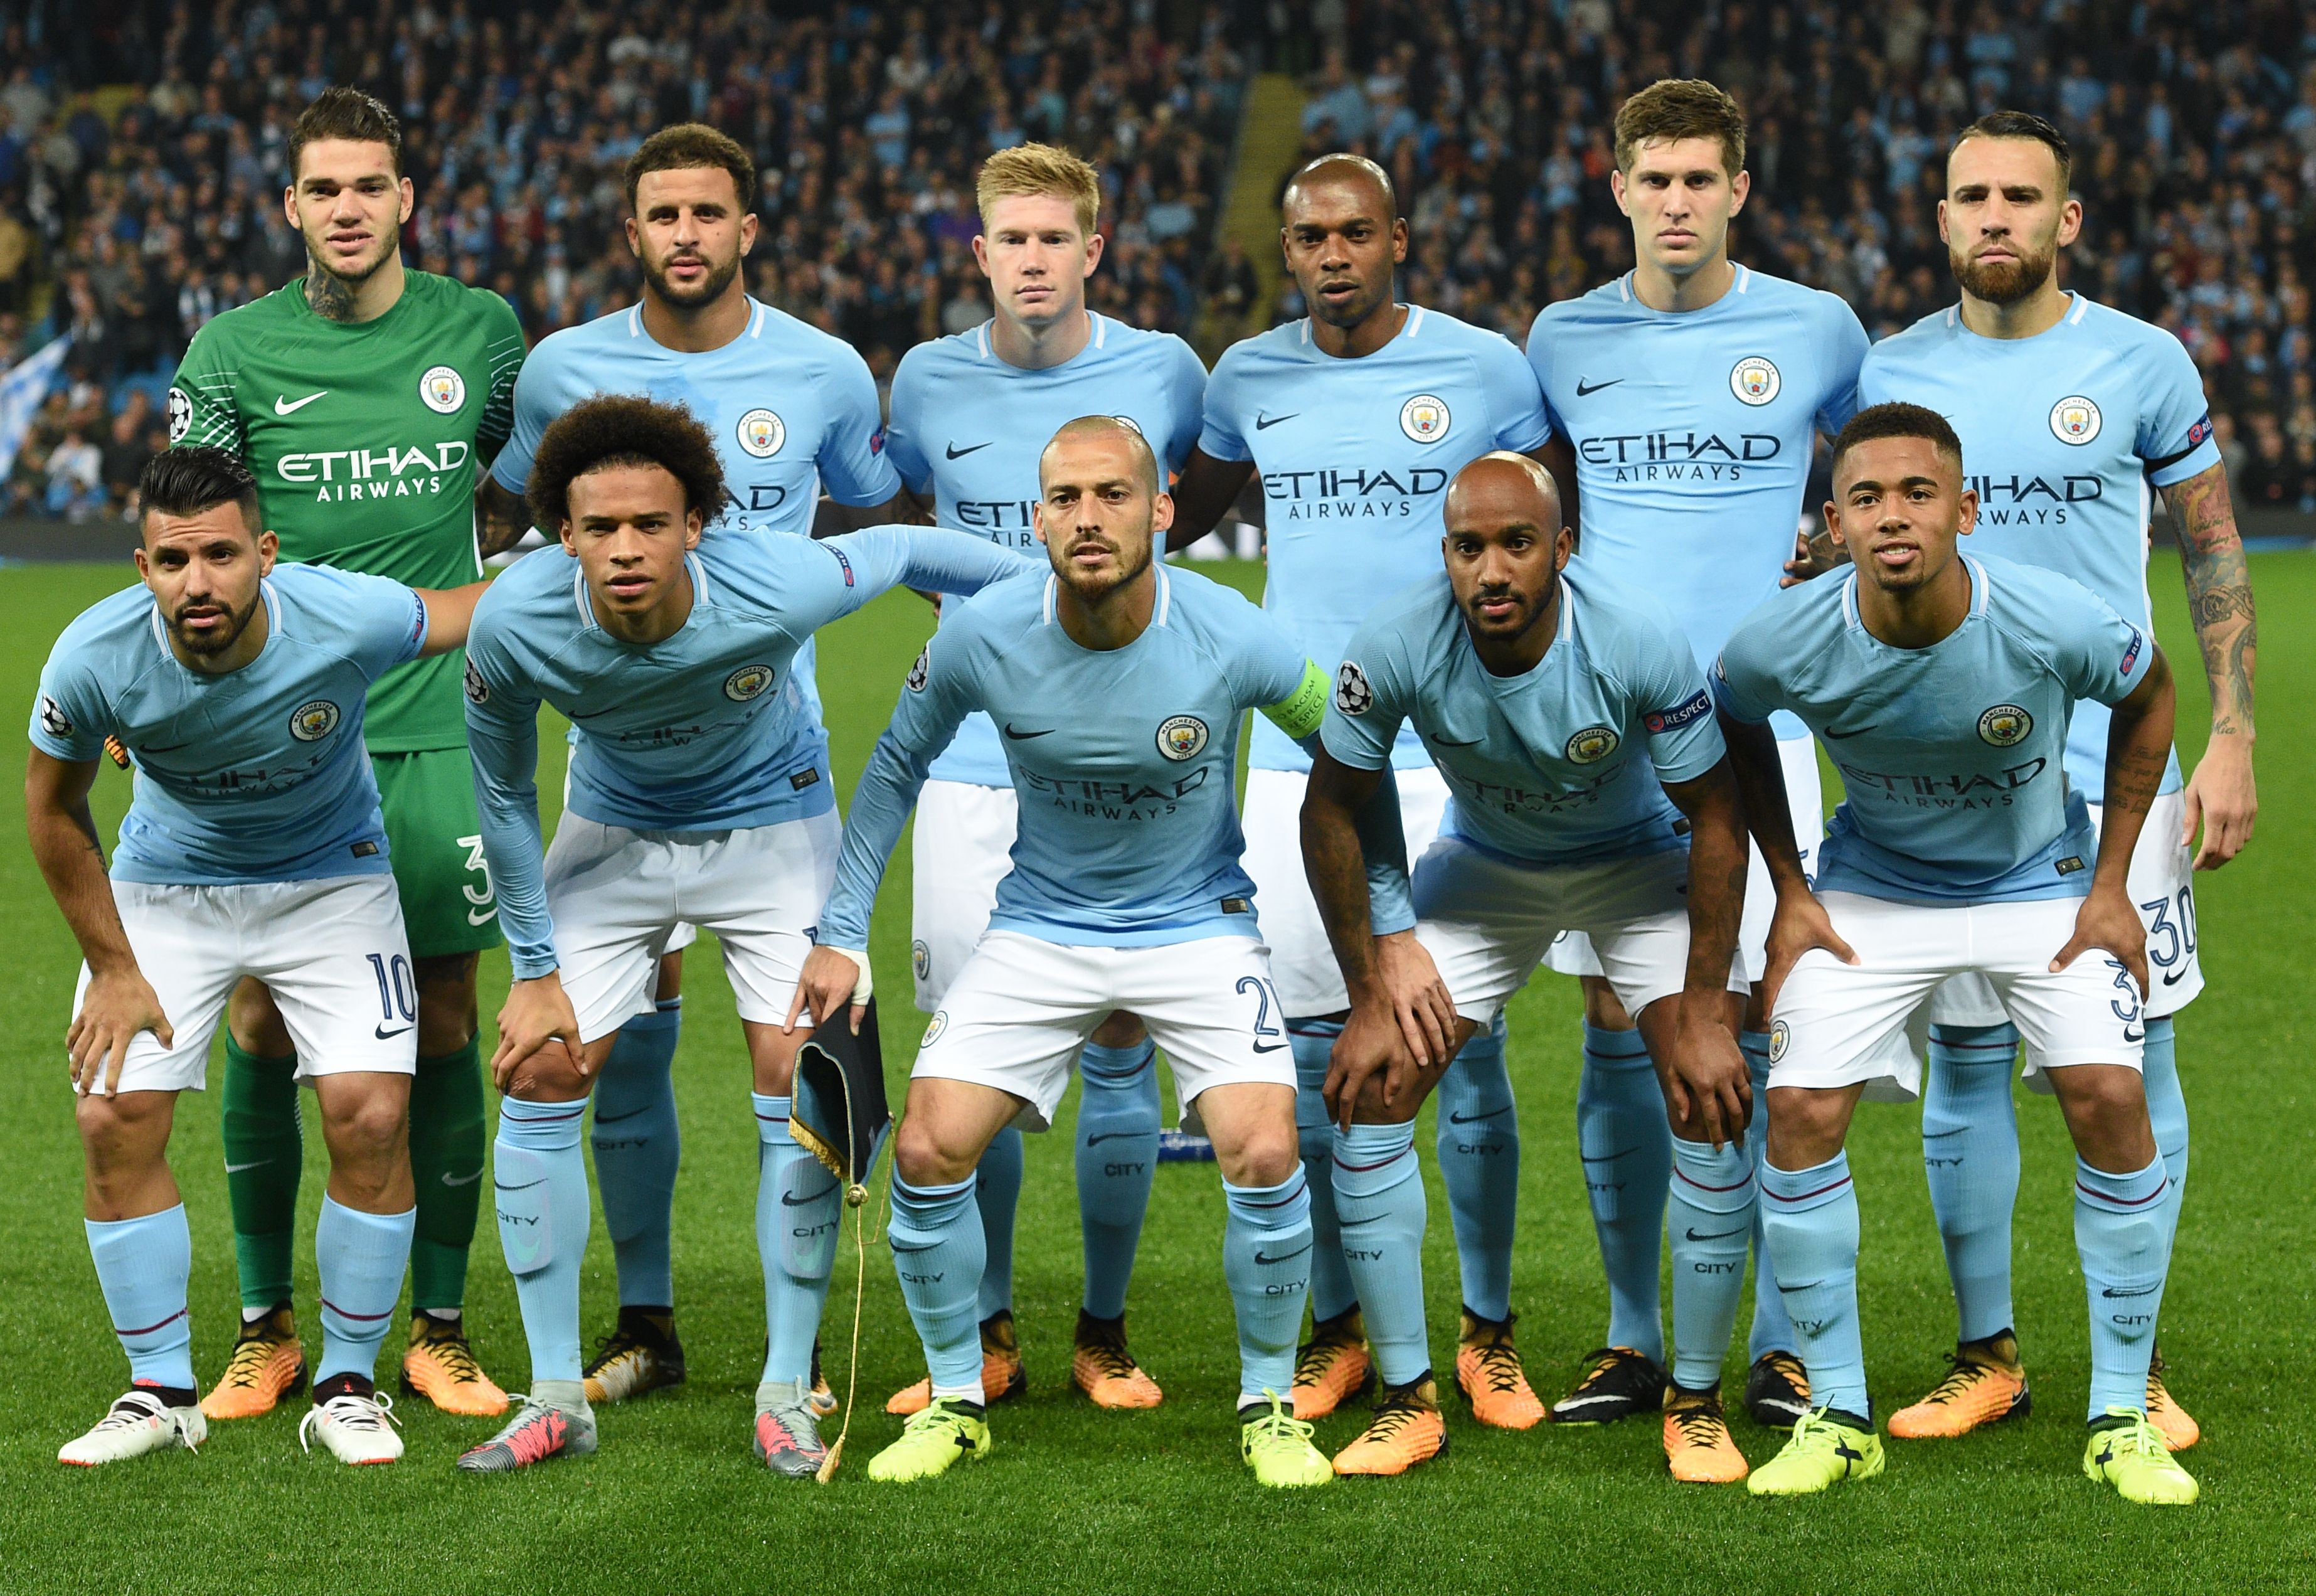 (Back row LtoR) Manchester City's Brazilian goalkeeper Ederson, Manchester City's English defender Kyle Walker, Manchester City's Belgian midfielder Kevin De Bruyne, Manchester City's Brazilian midfielder Fernandinho, Manchester City's English defender John Stones and Manchester City's Argentinian defender Nicolas Otamendi, and (Front row LtoR) Manchester City's Argentinian striker Sergio Aguero, Manchester City's German midfielder Leroy Sane, Manchester City's Spanish midfielder David Silva, Manchester City's English midfielder Fabian Delph and Manchester City's Brazilian striker Gabriel Jesus, pose for a photo ahead of the Group F football match between Manchester City and Shakhtar Donetsk at the Etihad Stadium in Manchester, north west England, on September 26, 2017. / AFP PHOTO / Oli SCARFF        (Photo credit should read OLI SCARFF/AFP/Getty Images)